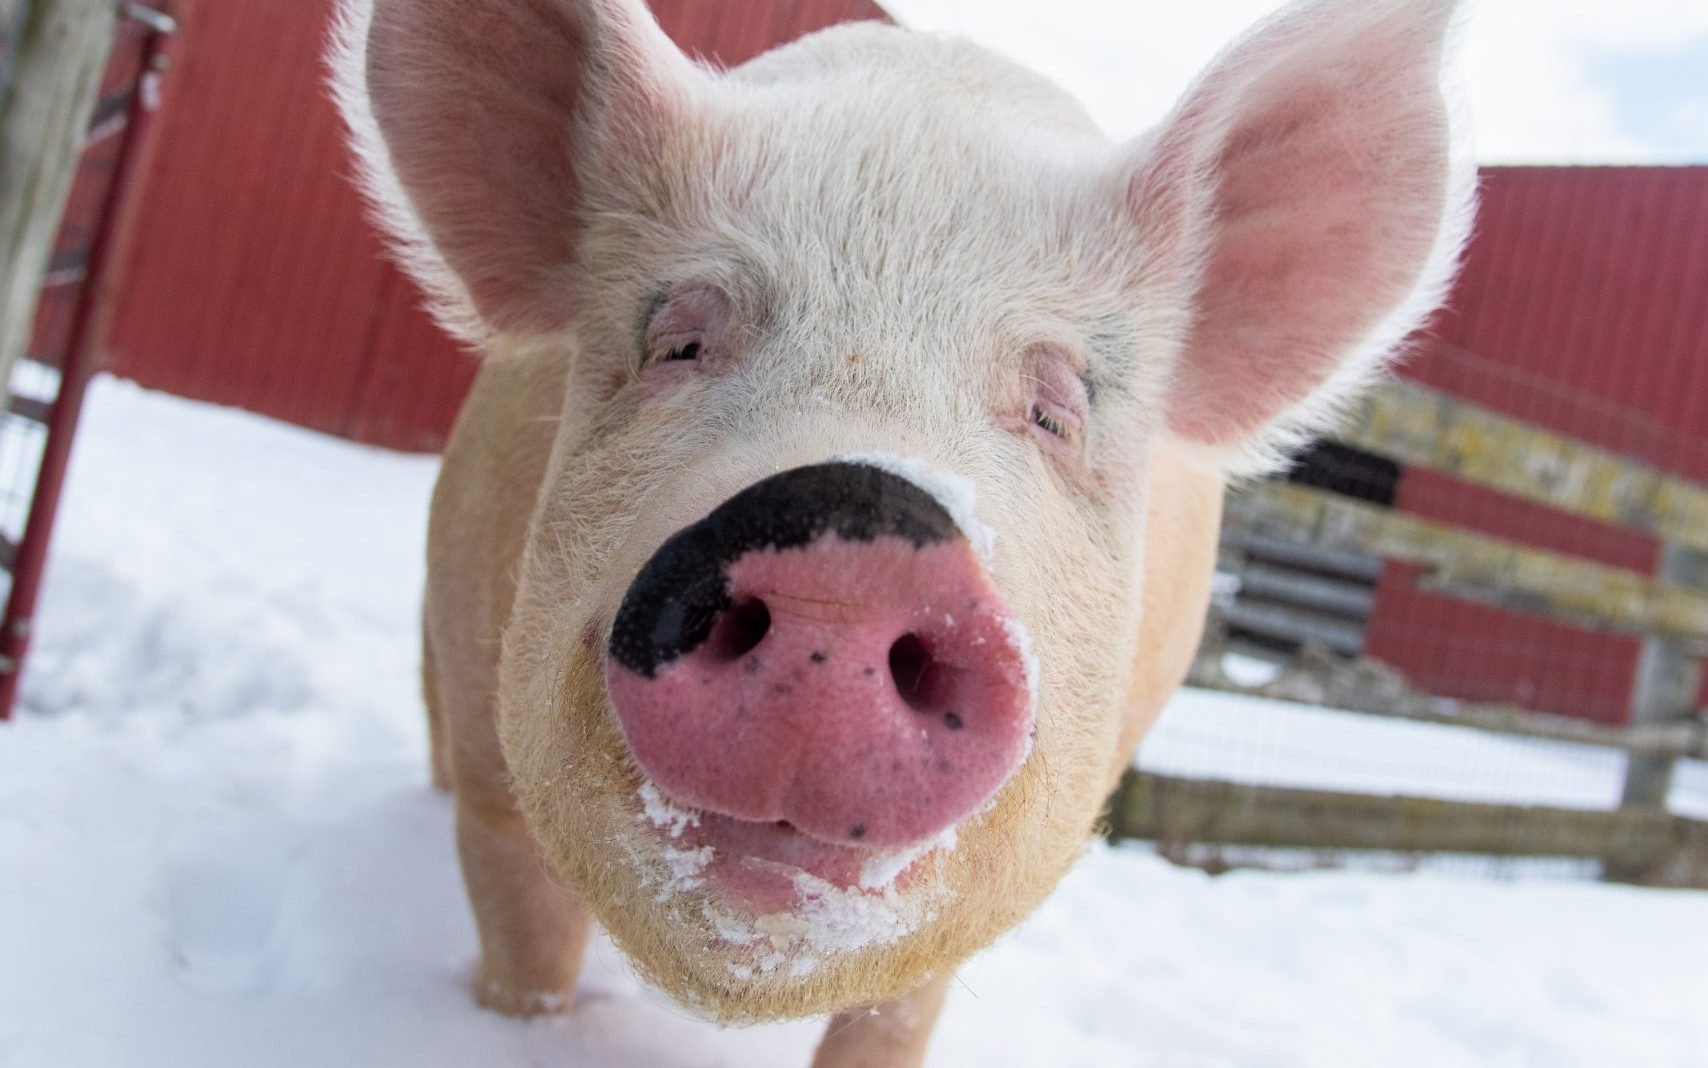 Jenny pig stands in the snow with her pink nose close to the camera